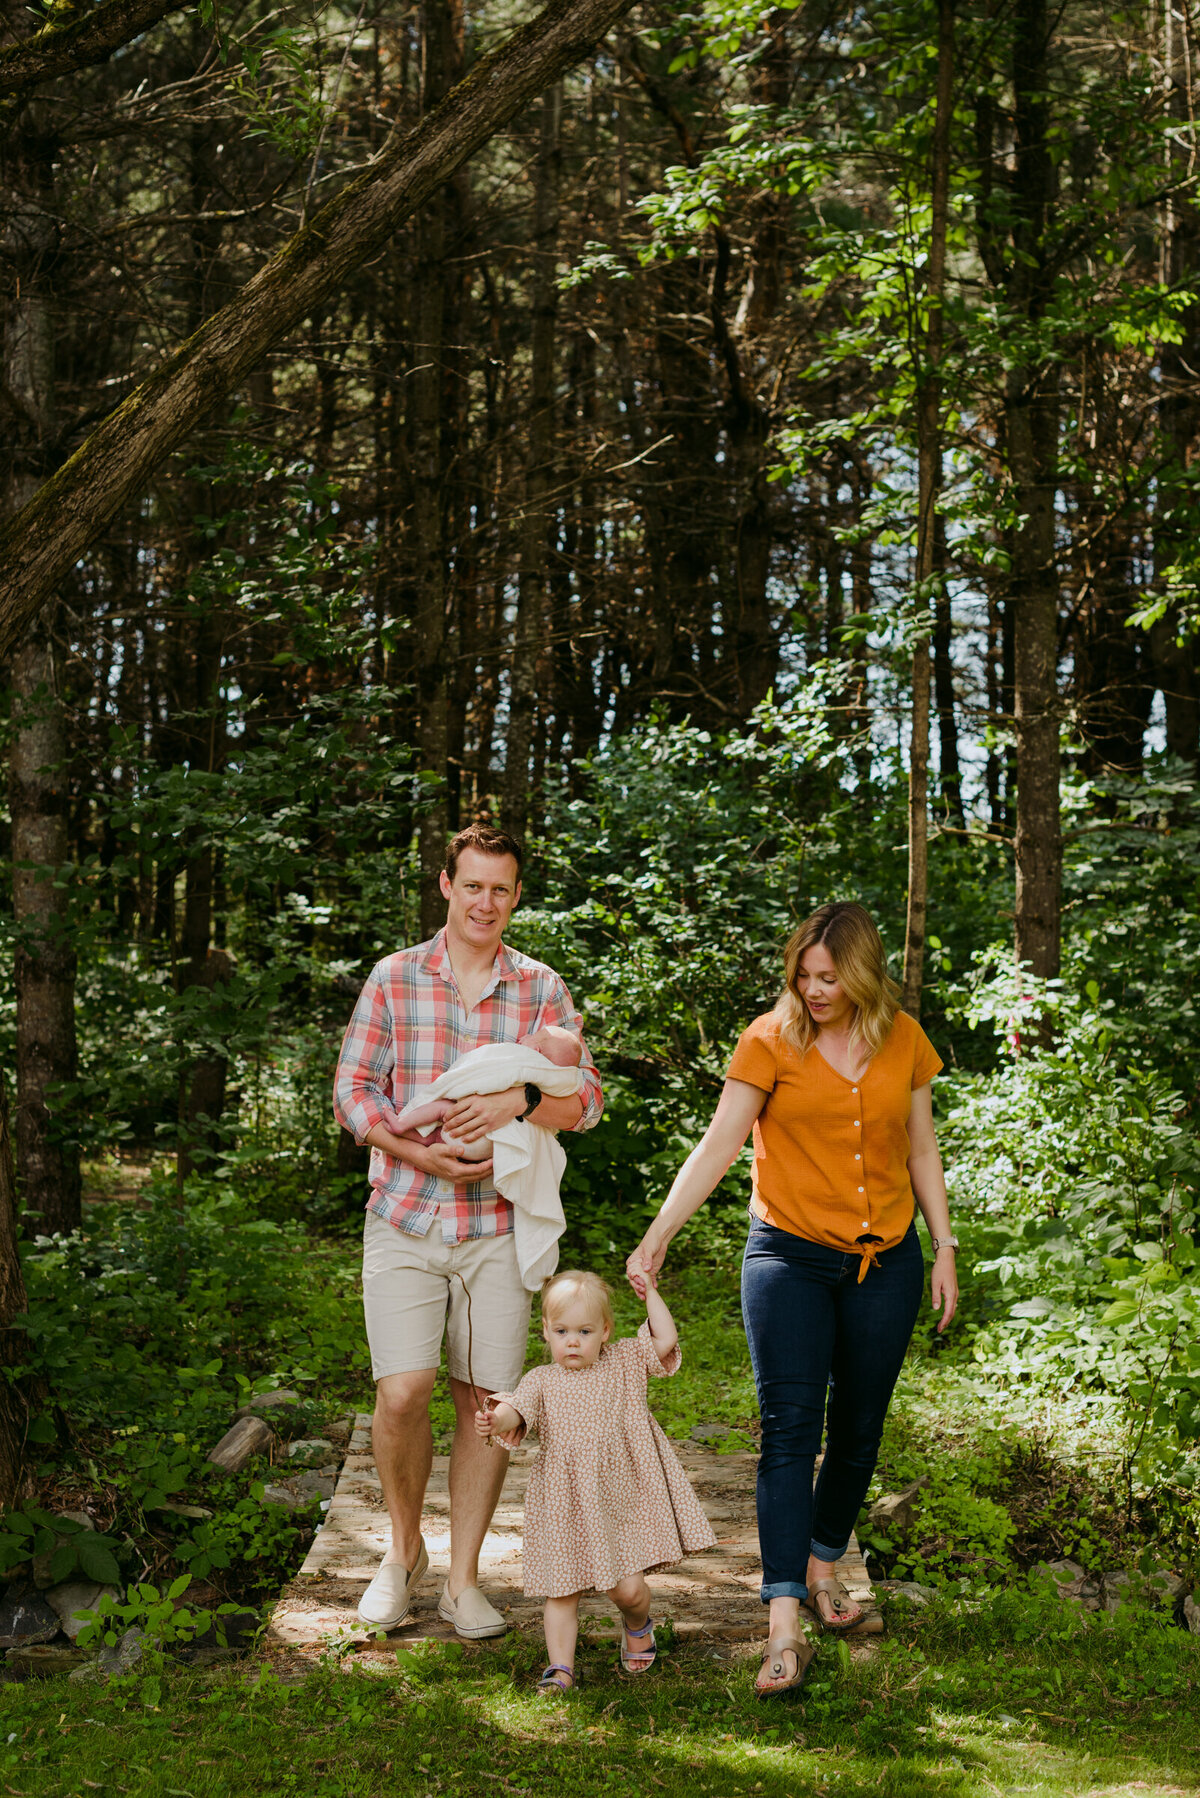 Family of 4 walking outdoors in the forest